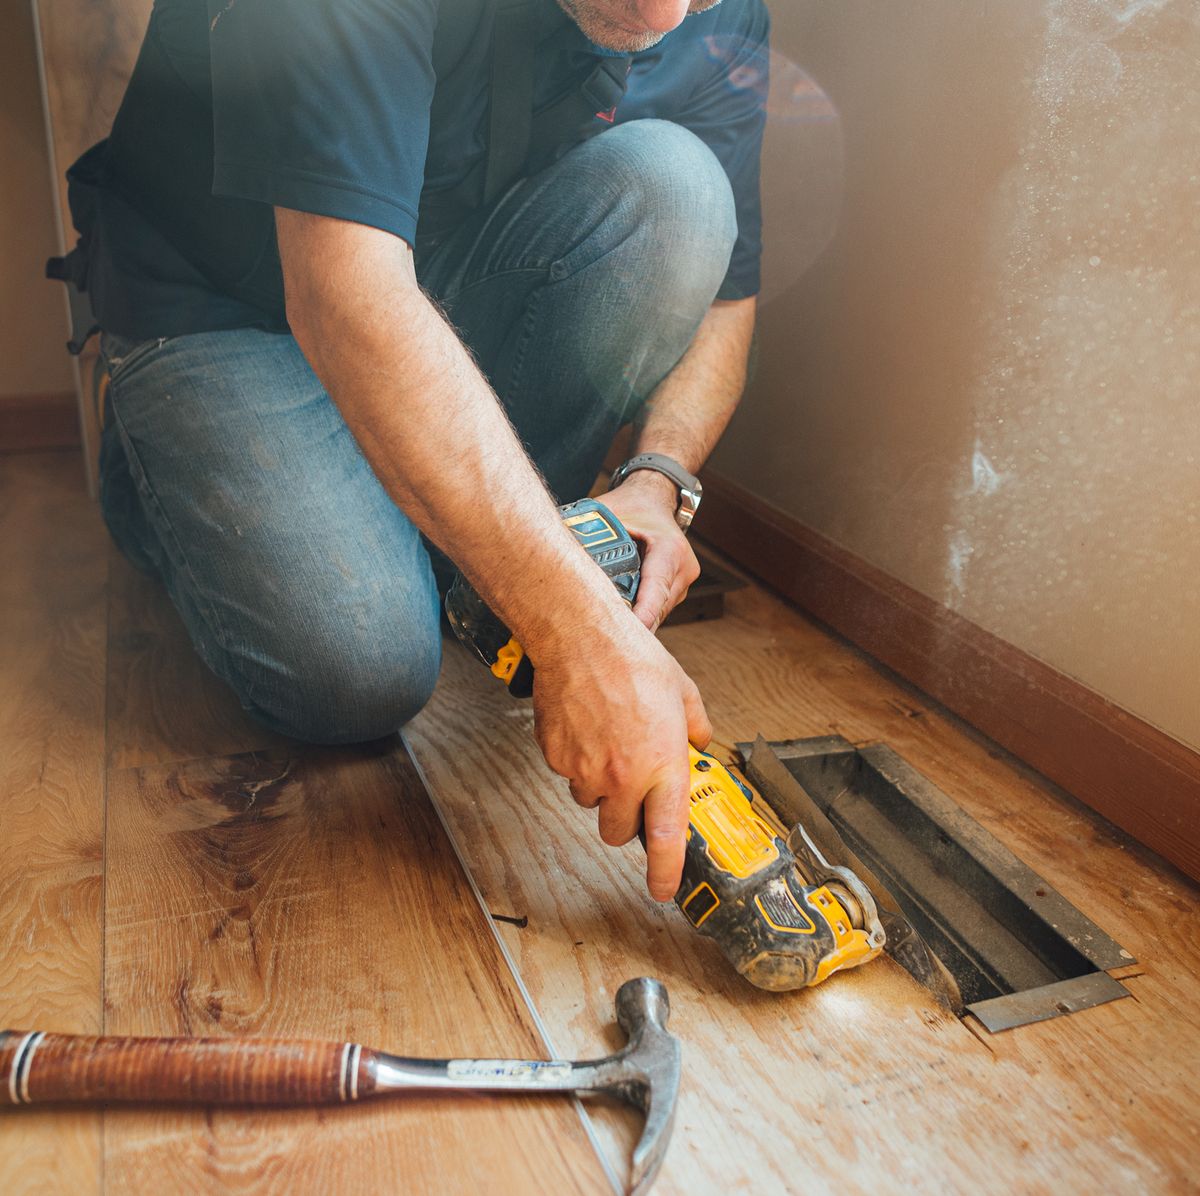 12 Ways To Use Oscillating Tools For Your Next DIY Project